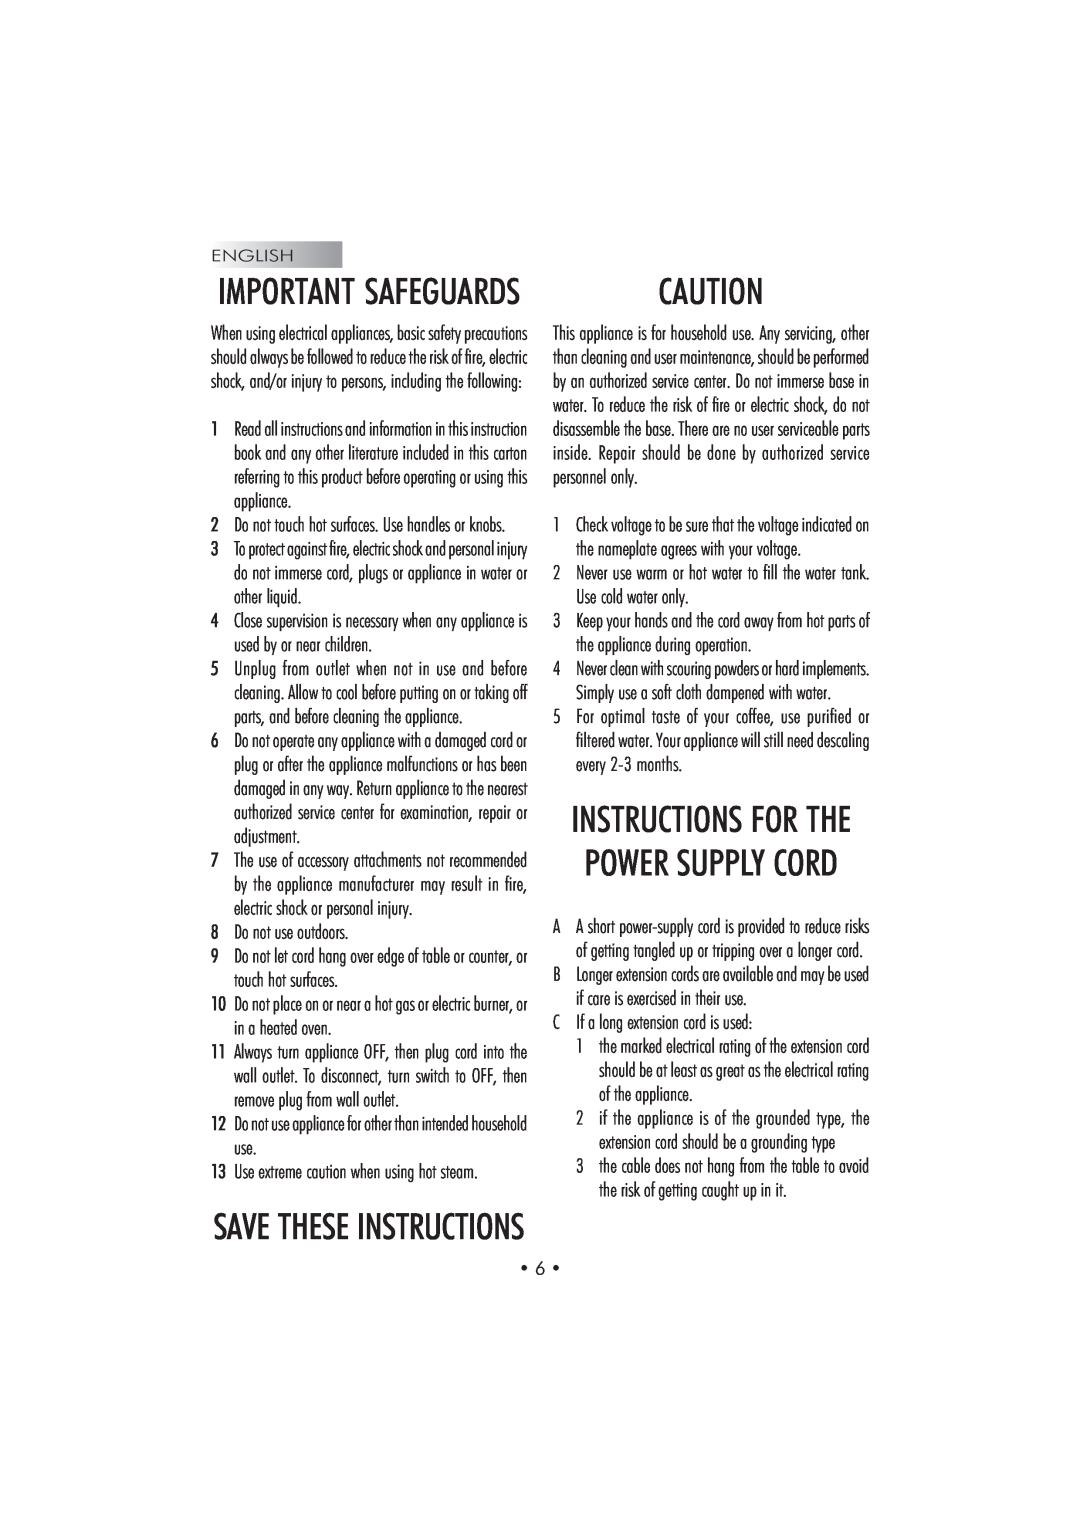 Saeco Coffee Makers SUP 025 PYR Save These Instructions, Instructions For The Power Supply Cord, Important Safeguards 